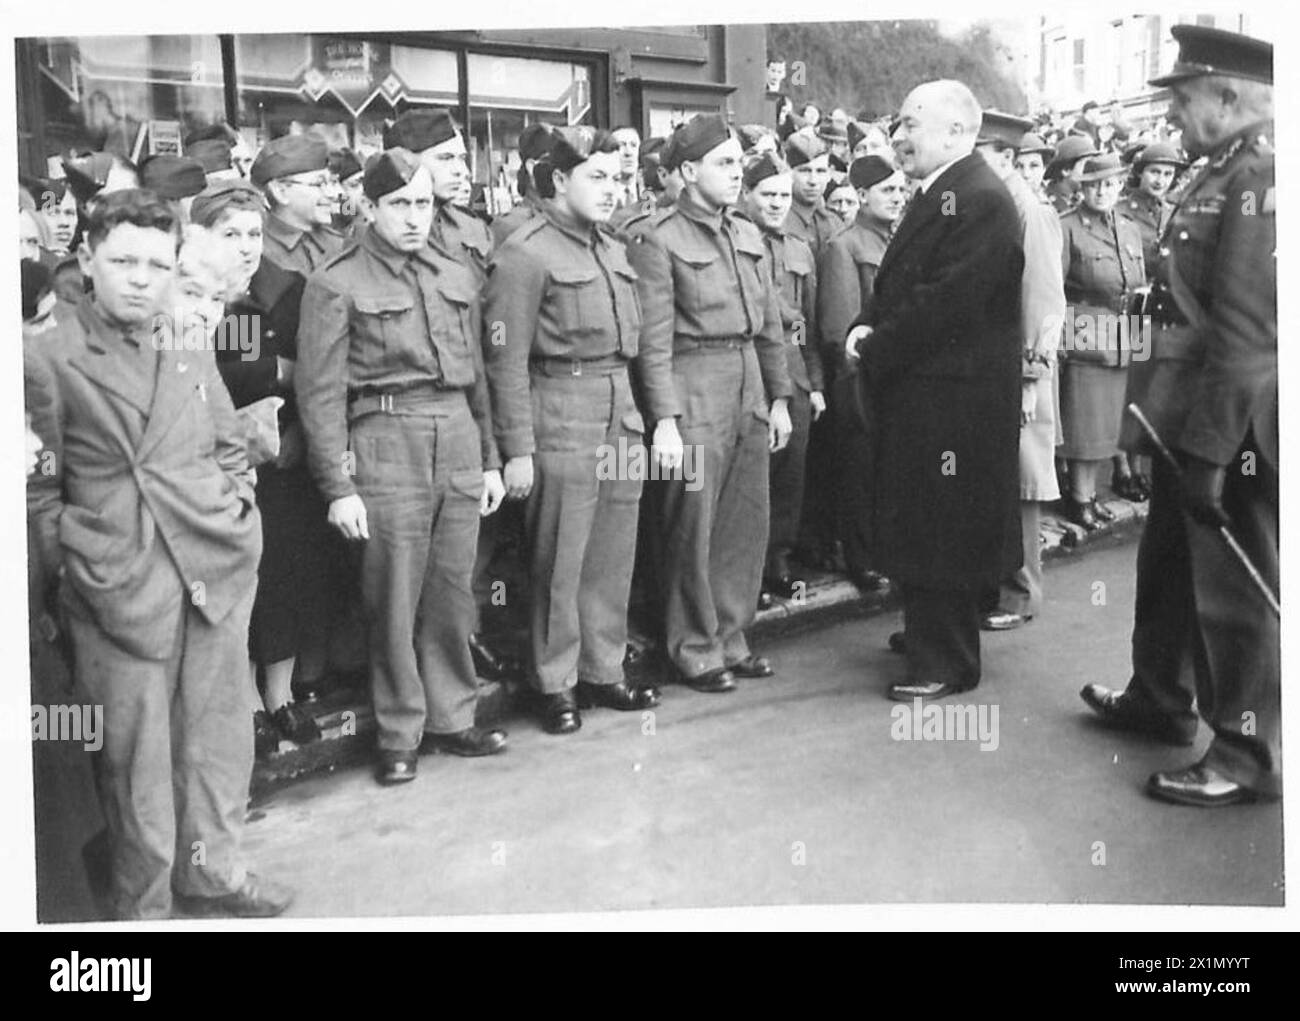 NEW COLOURS FOR BELGIAN TROOPS - The Belgian Prime Minister chatting with Belgian soldiers wounded in the war, who were present at the ceremony, British Army Stock Photo